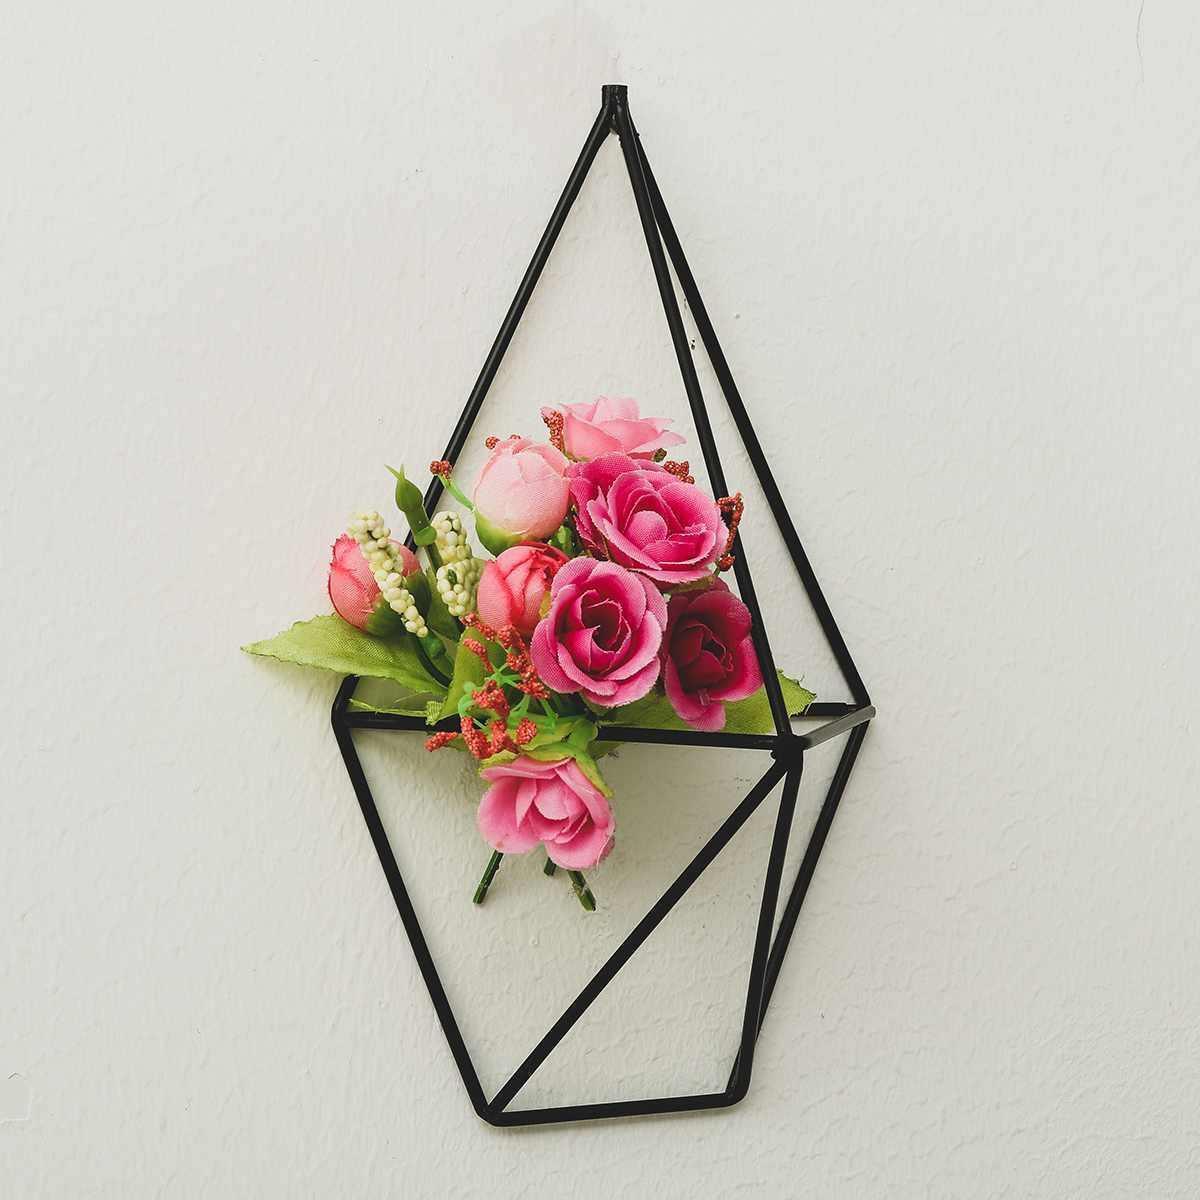 2-Piece Geometric Wall-Mounted Air Plant Hangers